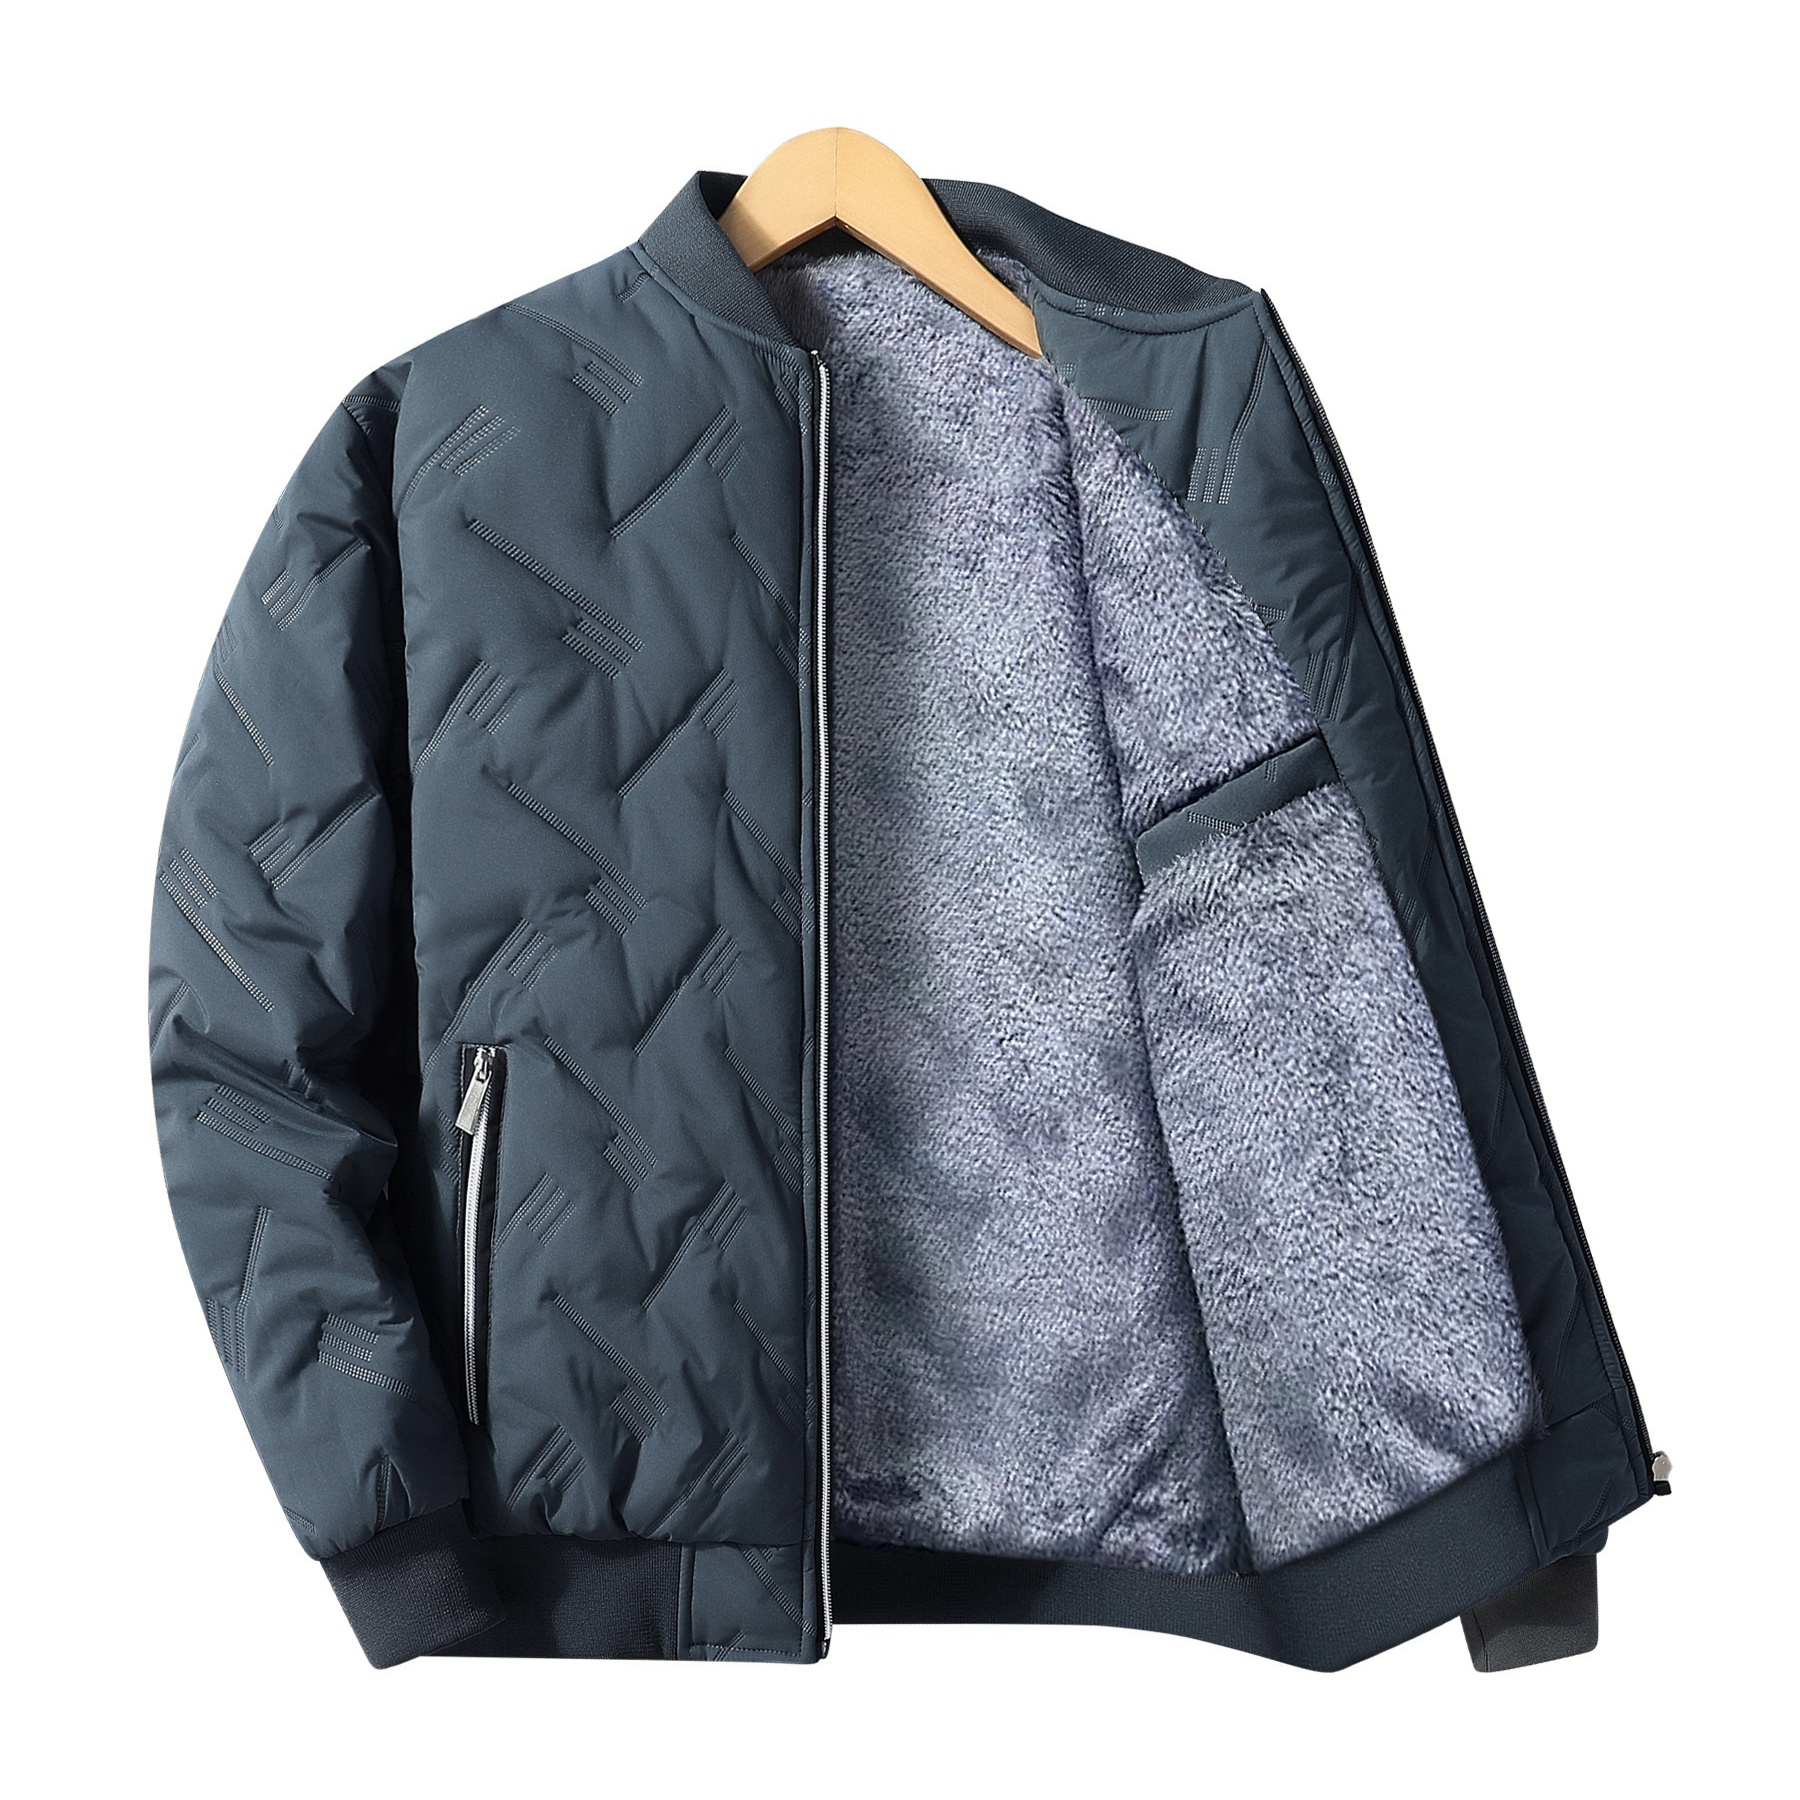 

Men's Casual Warm Quilted Jacket With Zipper Pockets, Windproof Baseball Collar Jacket For Fall Winter